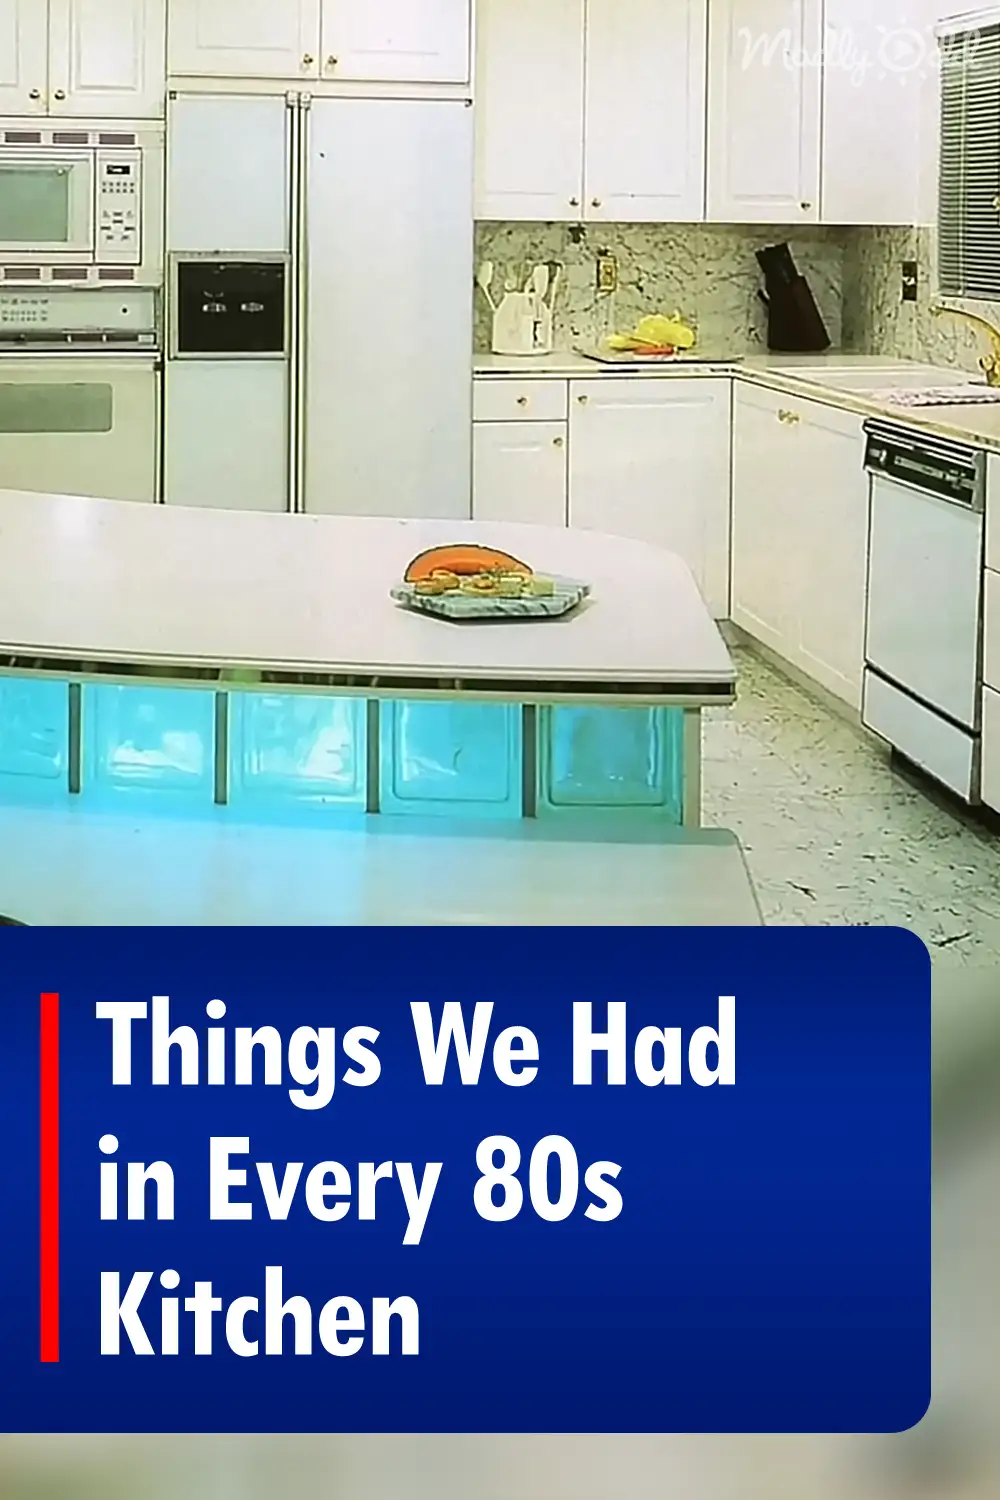 Things We Had in Every 80s Kitchen